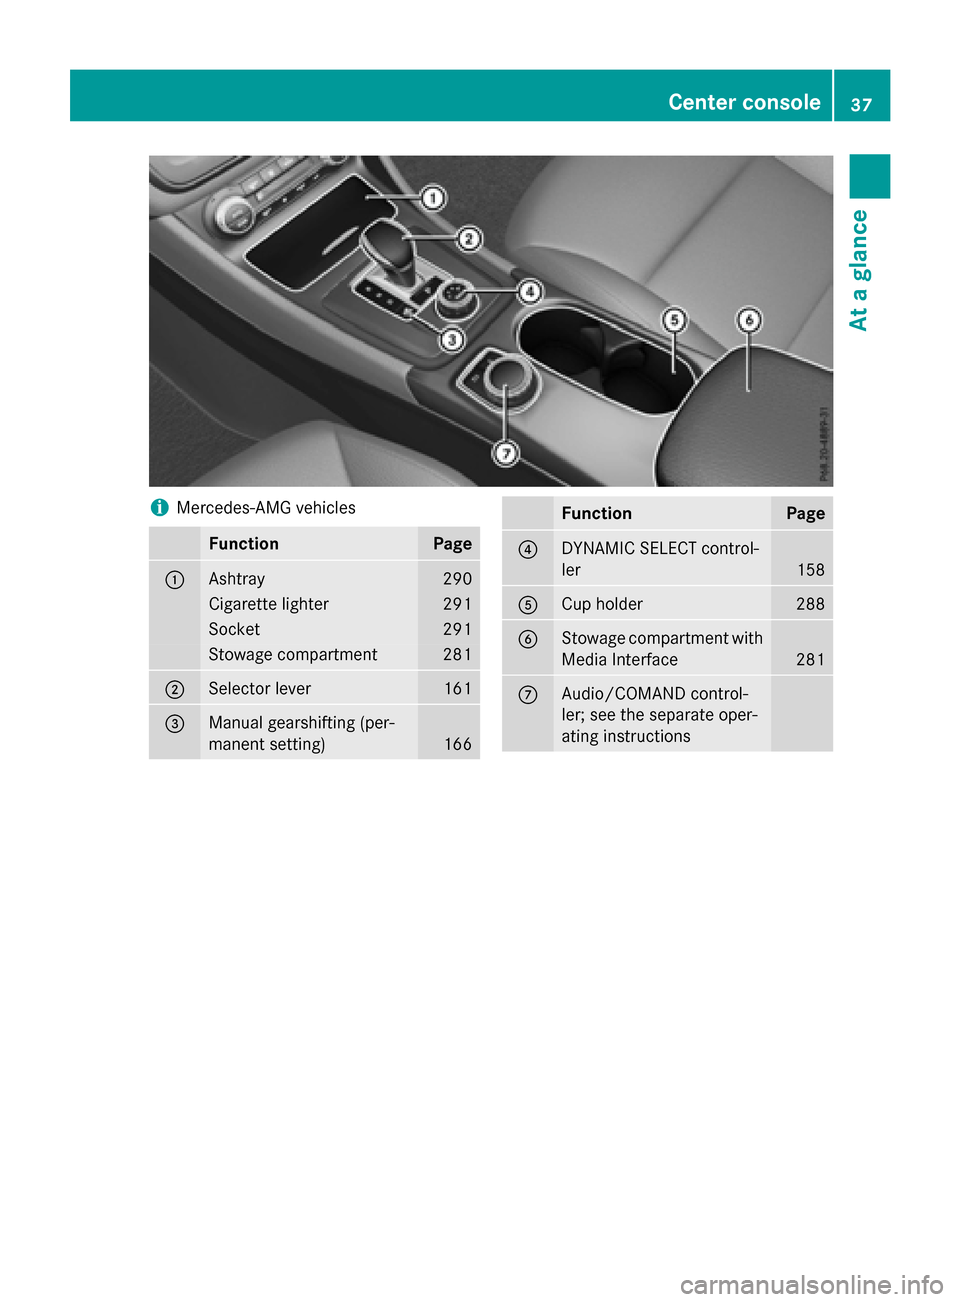 MERCEDES-BENZ GLA-Class 2017 X156 Owners Manual iMercedes-AMG vehicles
FunctionPage
:Ashtray290
Cigarette lighter291
Socket291
Stowage compartment281
;Selector lever161
=Manual gearshifting (per-
manent setting)
166
FunctionPage
?DYNAMIC SELECT con